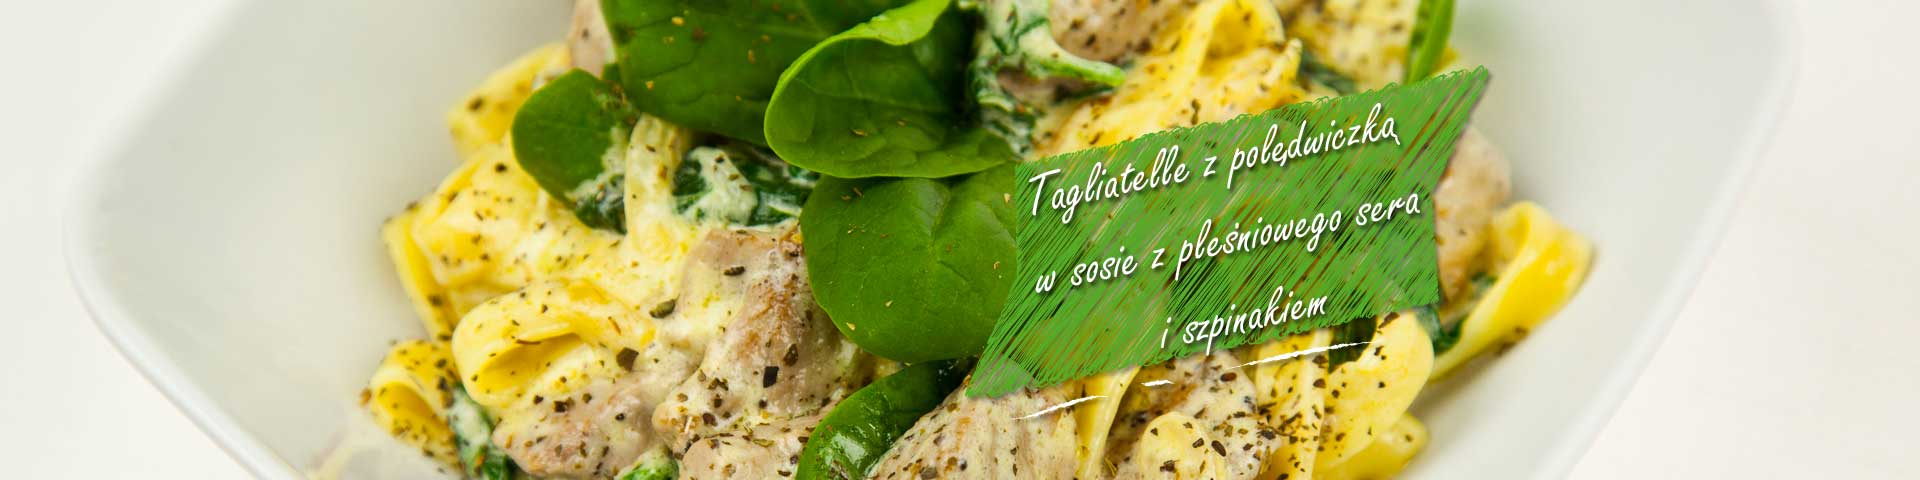 Tagliatelle with pork loin and spinach in a blue cheese sauce